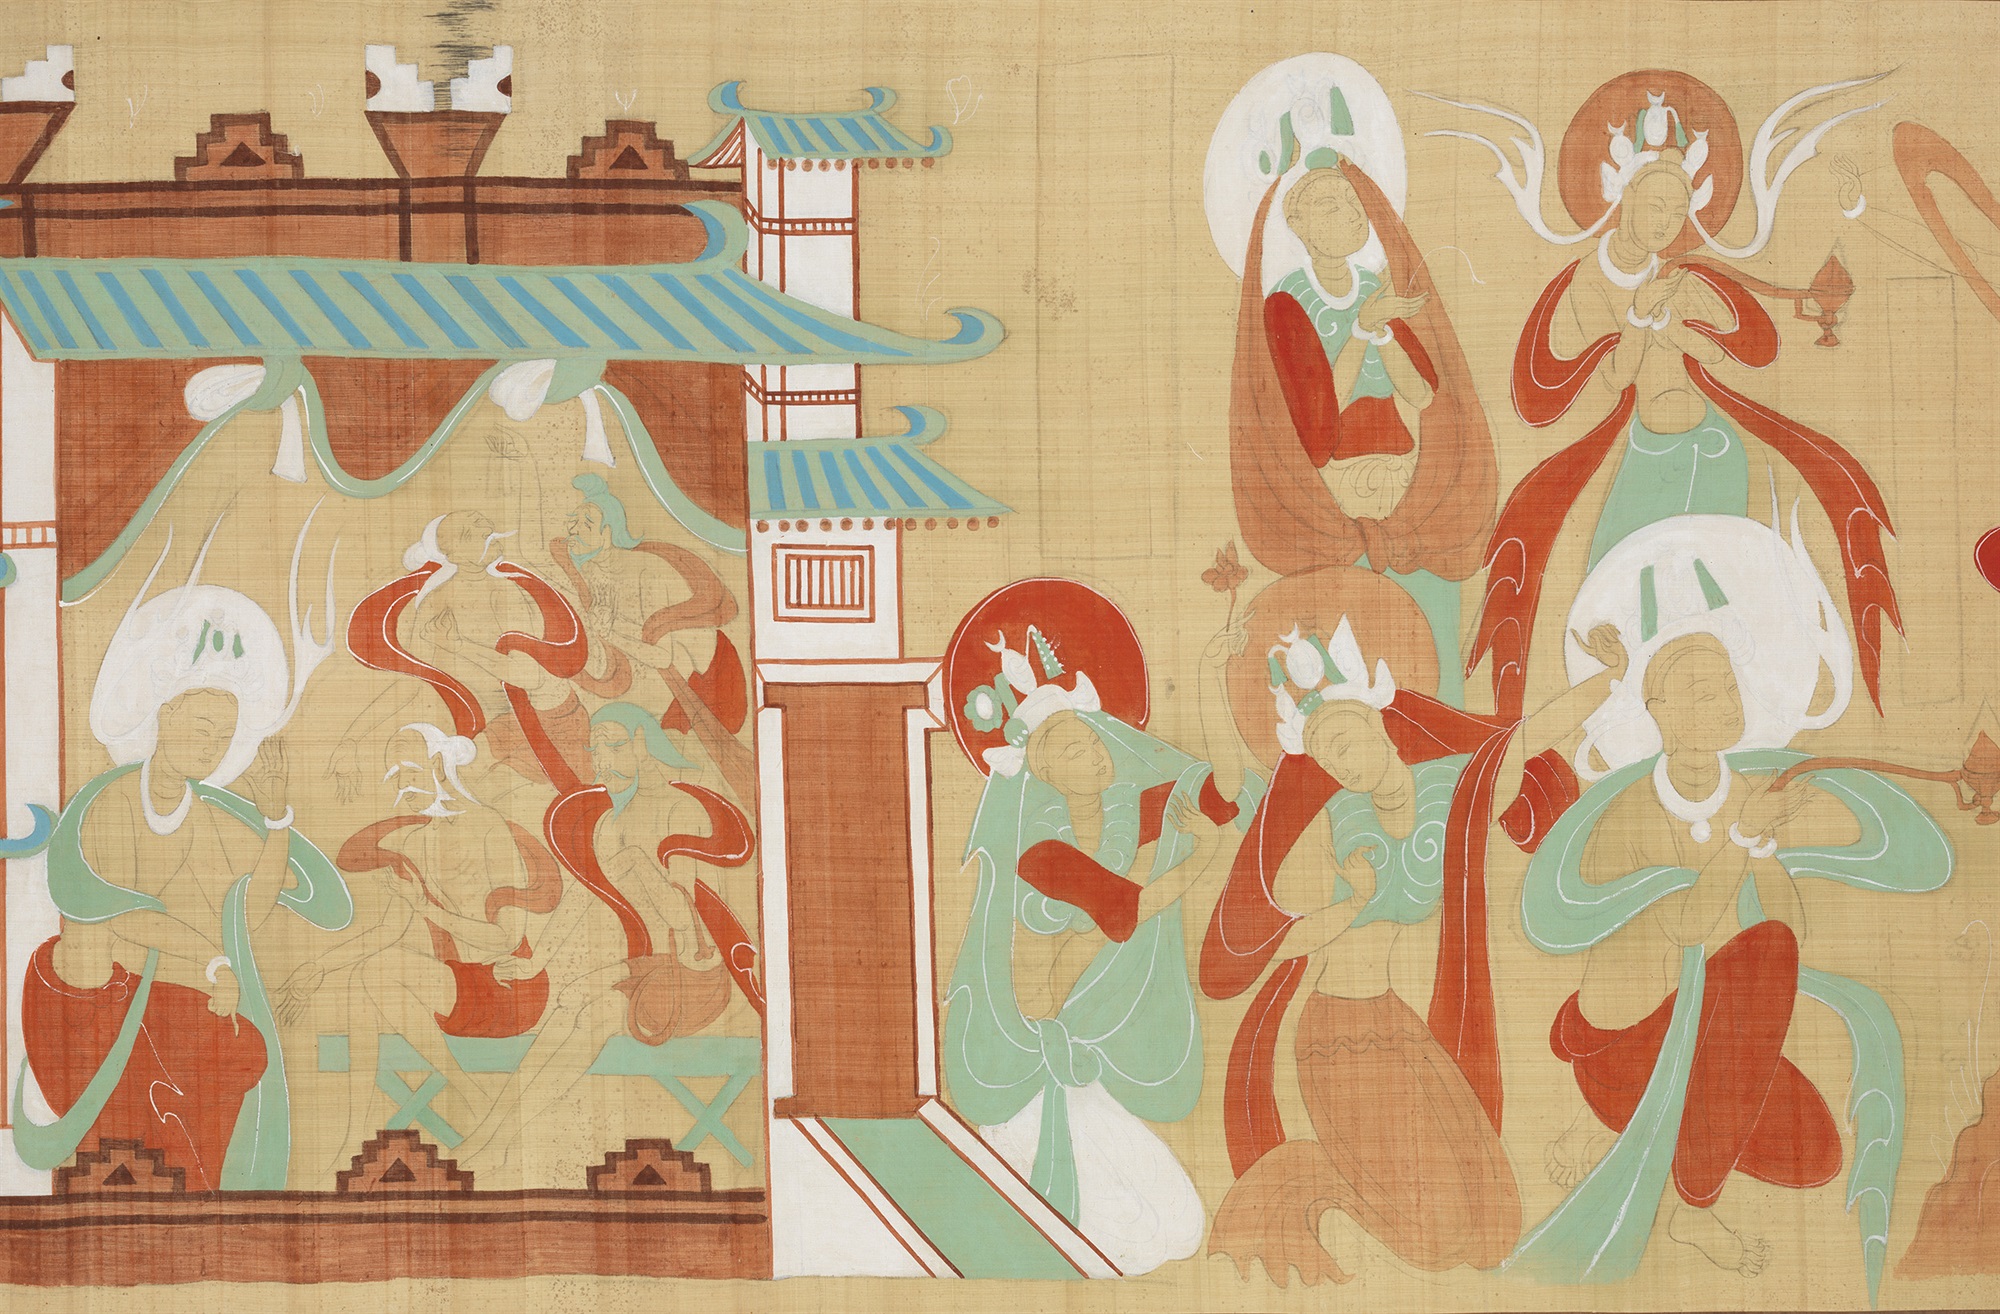 Copy of a Painting of the Jataka Tale of the Deer King in Mogao Cavepreview